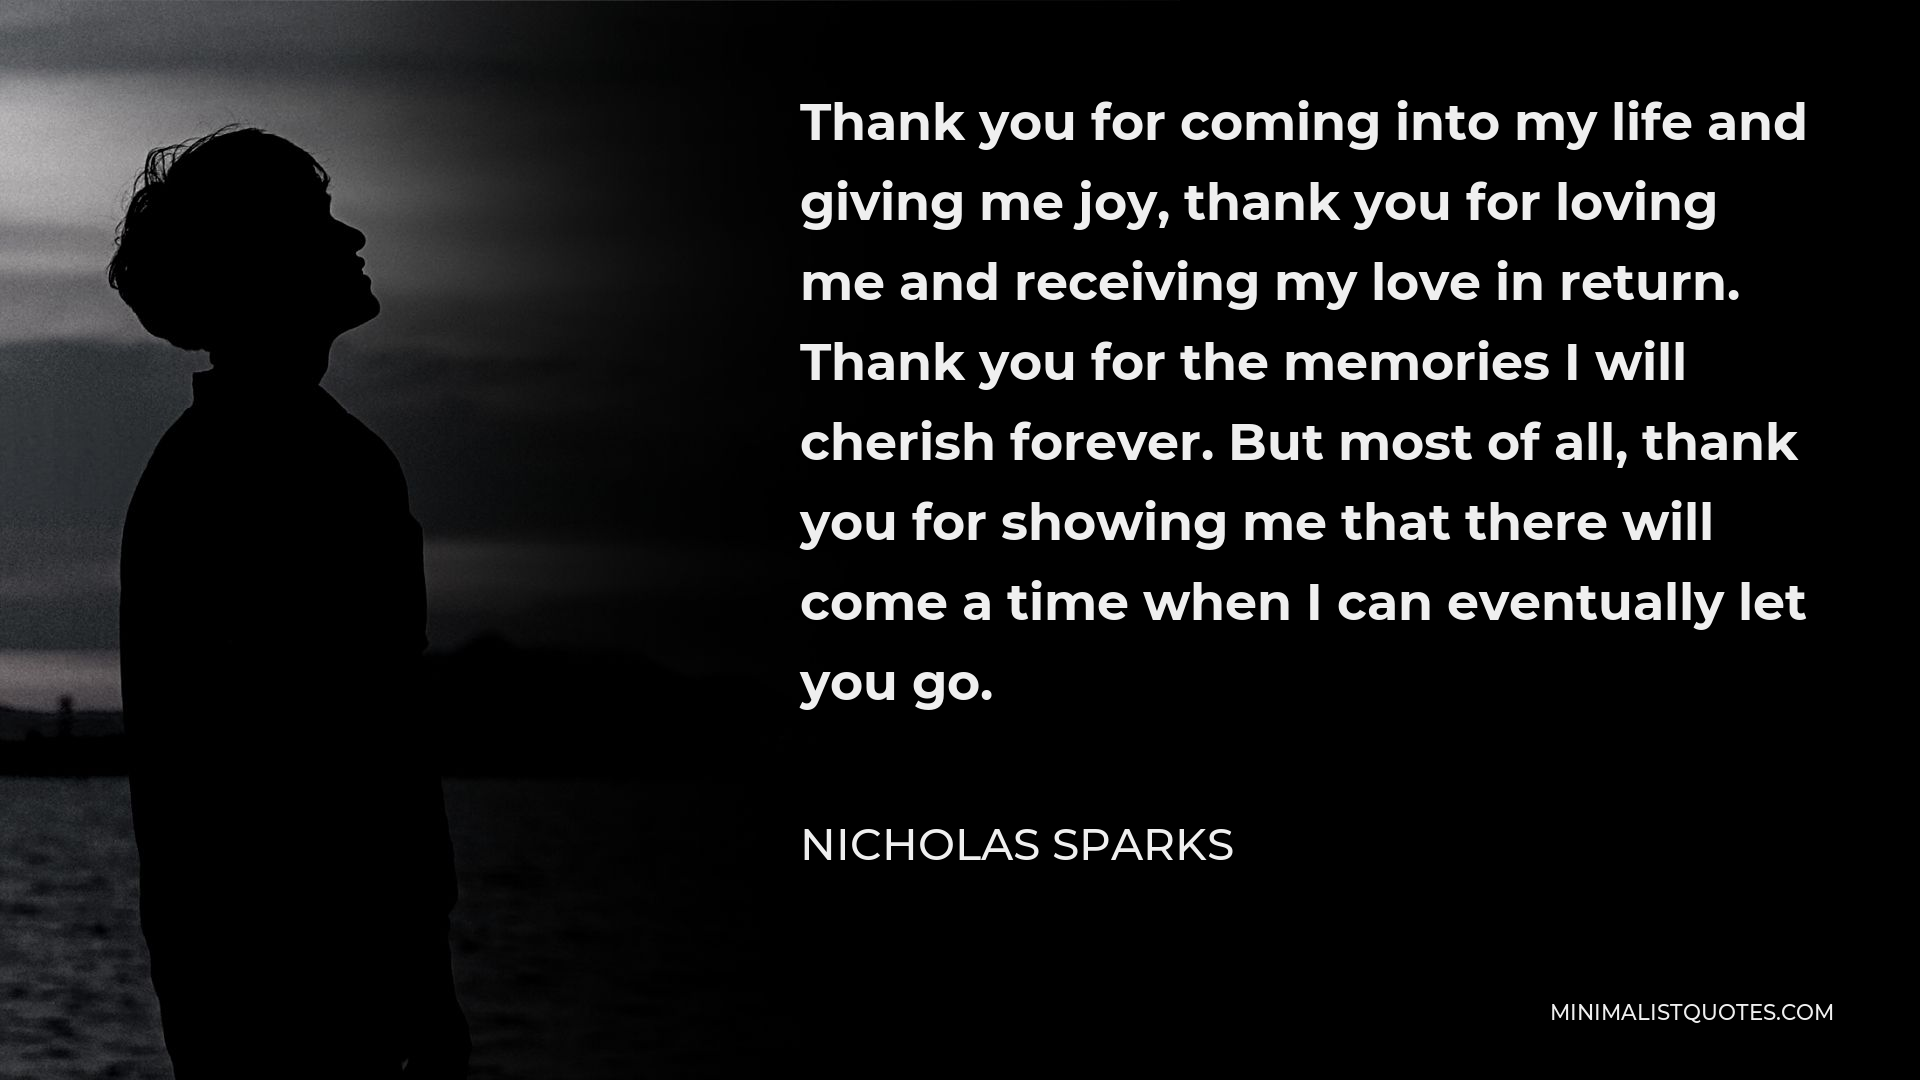 Nicholas Sparks Quote - Thank you for coming into my life and giving me joy, thank you for loving me and receiving my love in return. Thank you for the memories I will cherish forever. But most of all, thank you for showing me that there will come a time when I can eventually let you go.